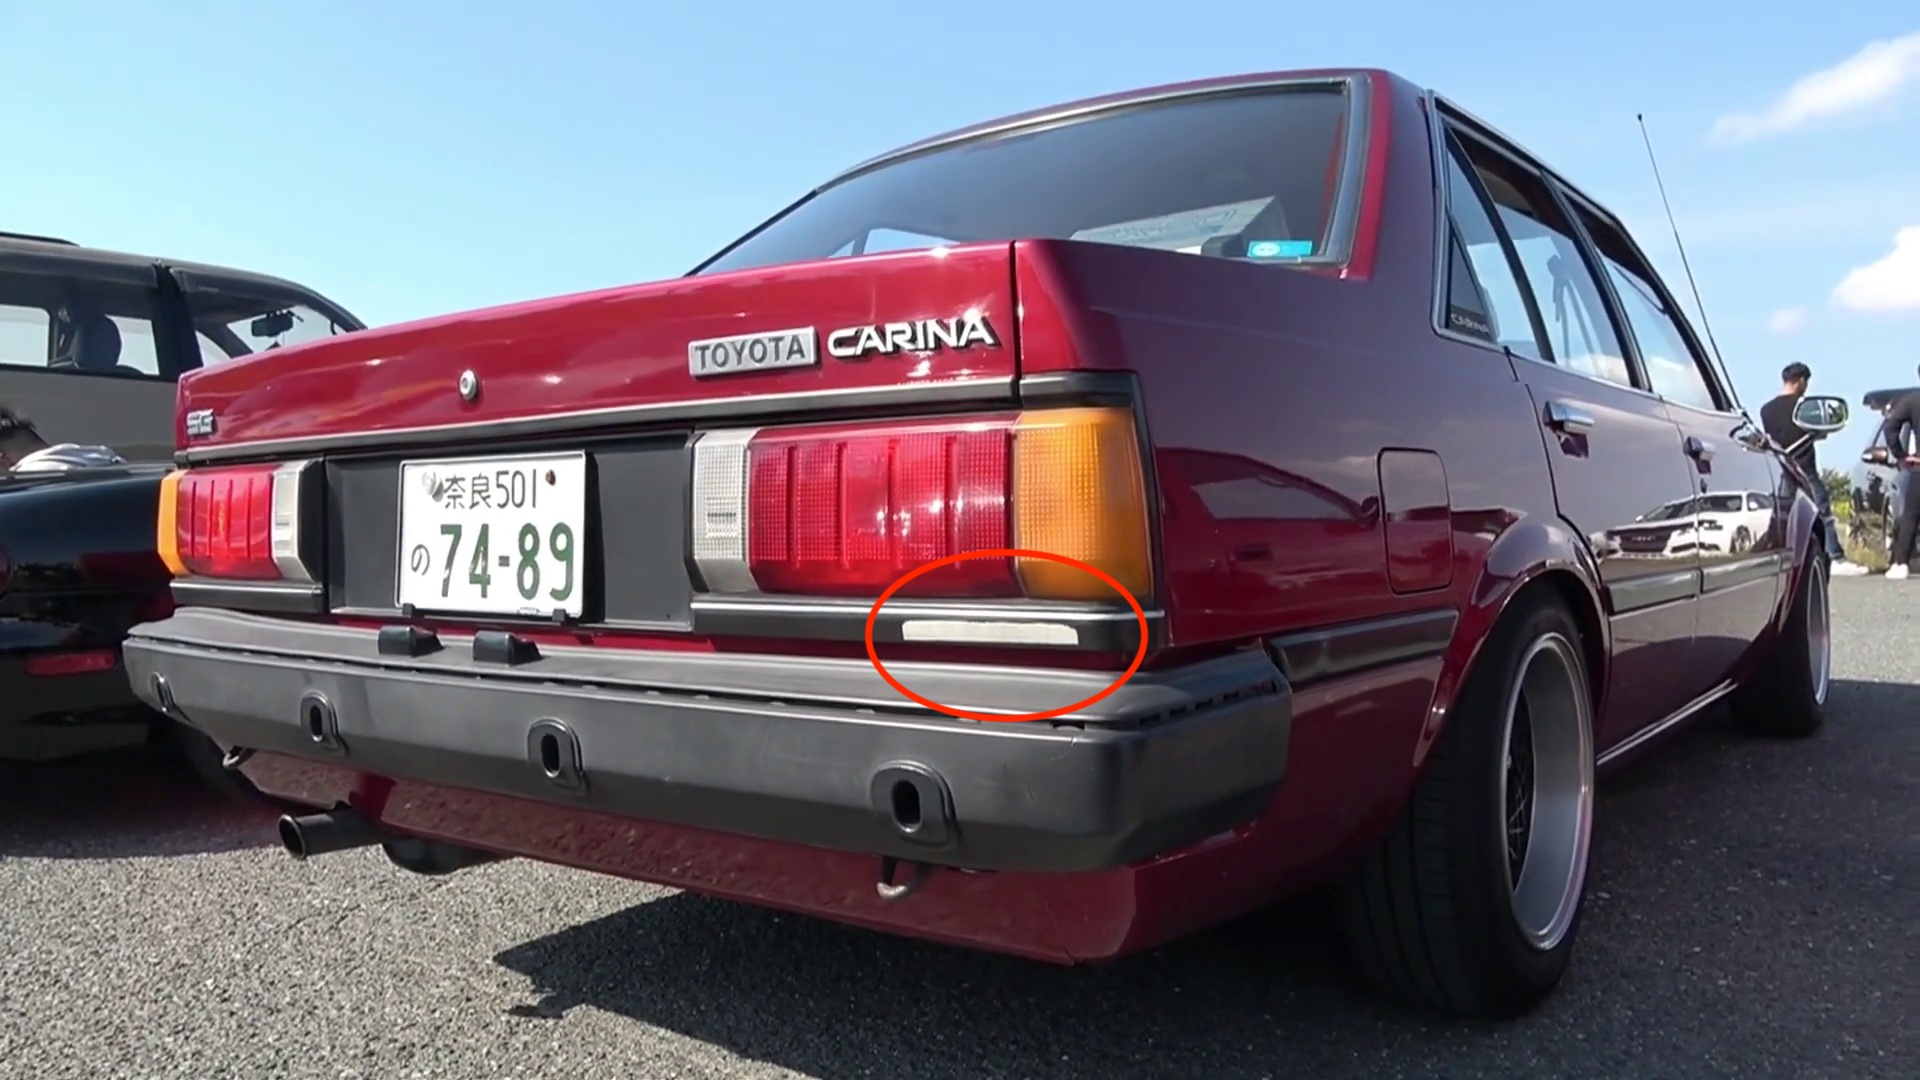 Toyota Carina SG Jeune with the same sticker on the tail light